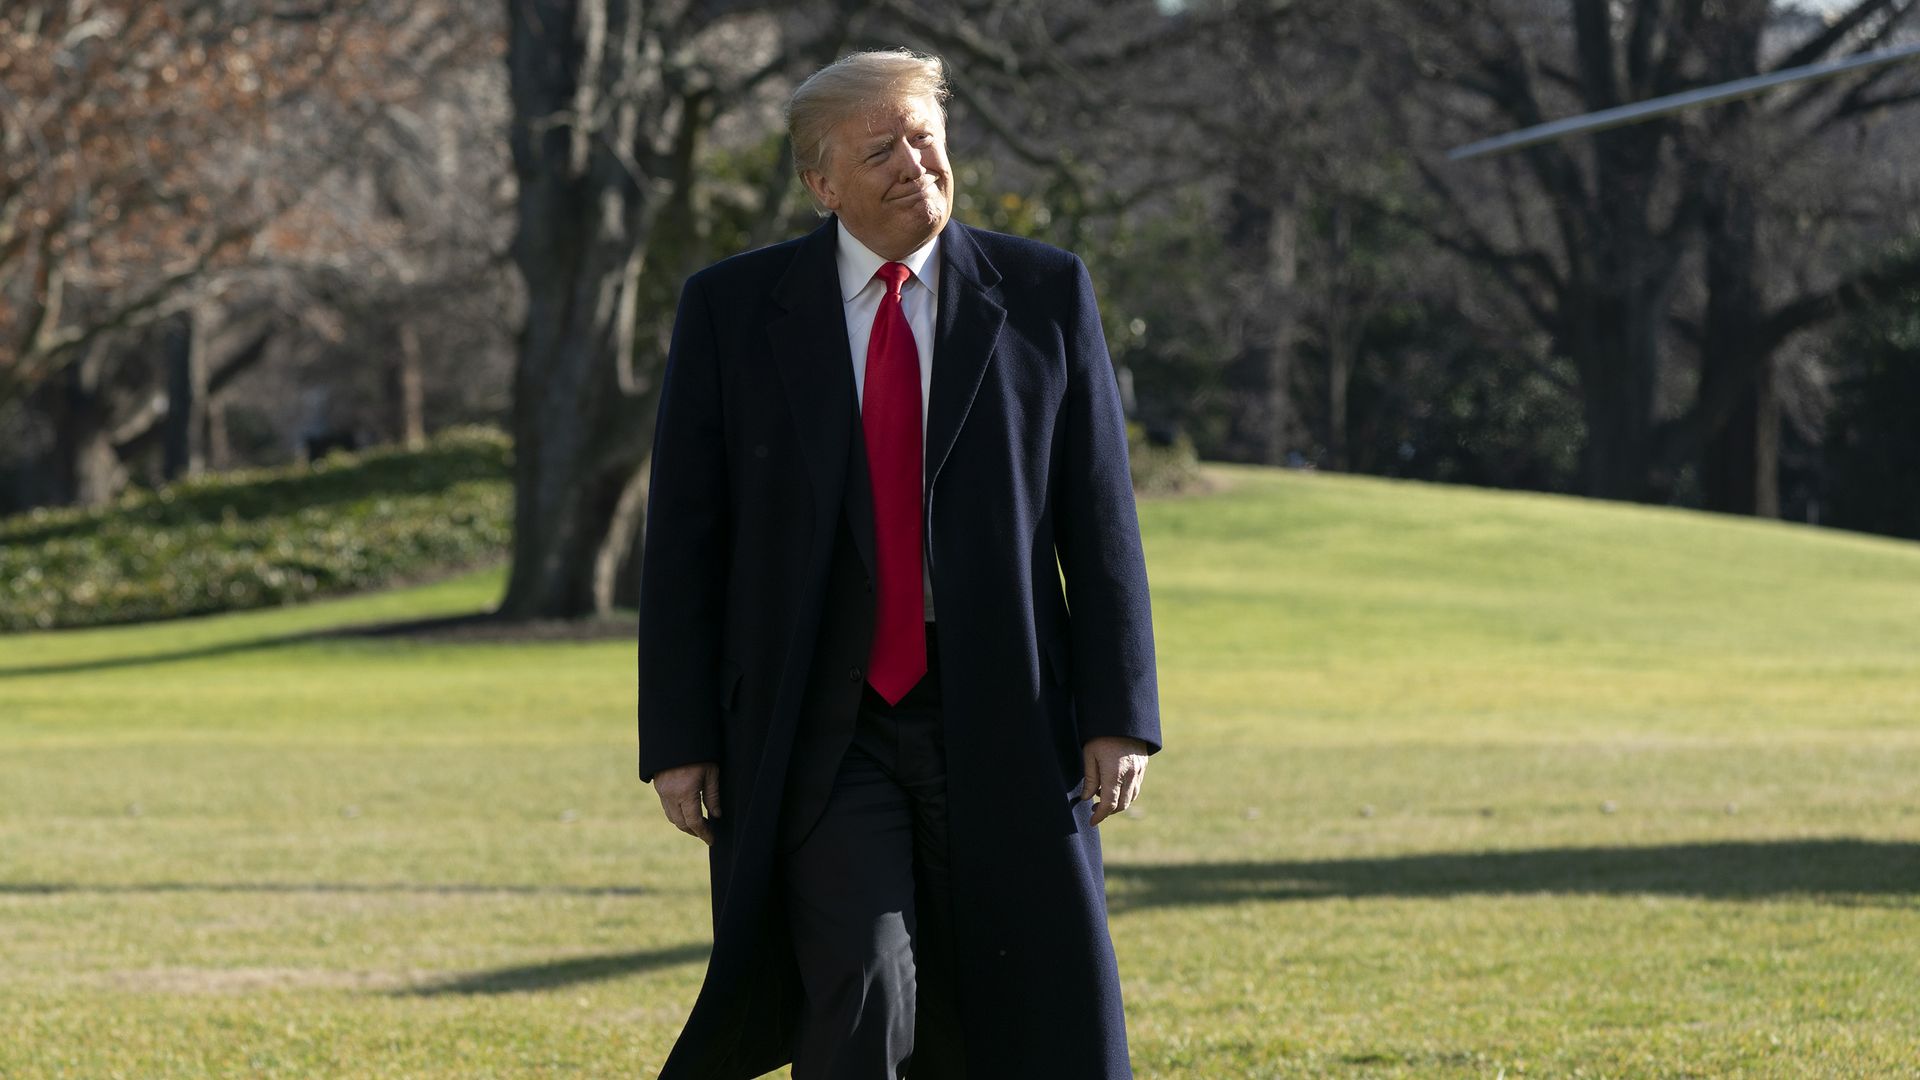 President Trump walks on the White House South Lawn